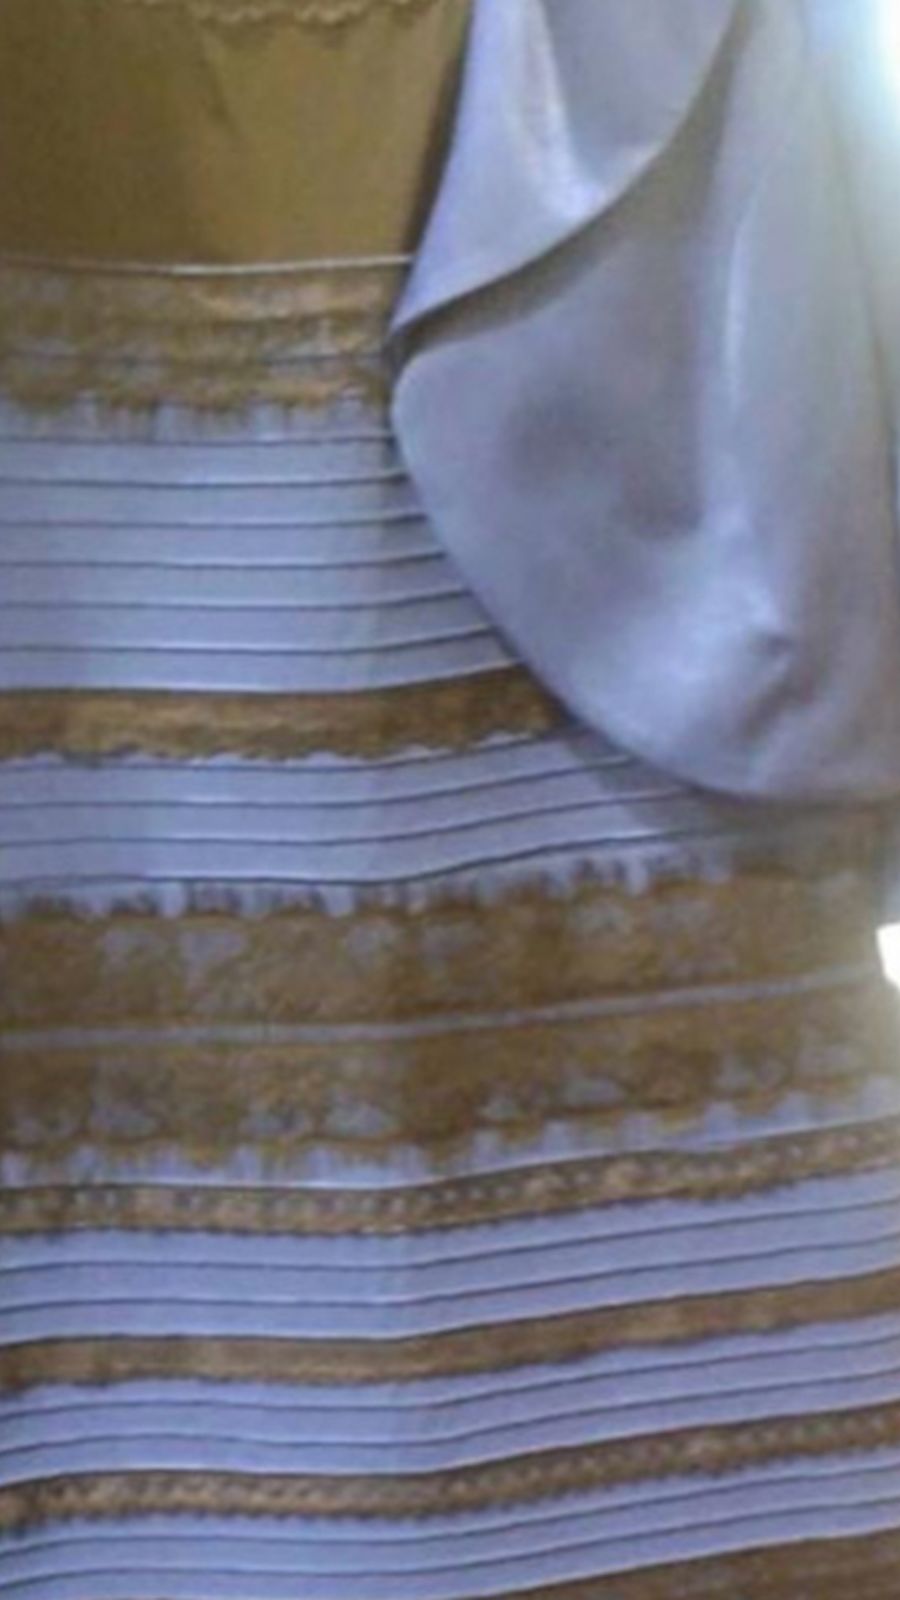 What color is this dress? | CNN